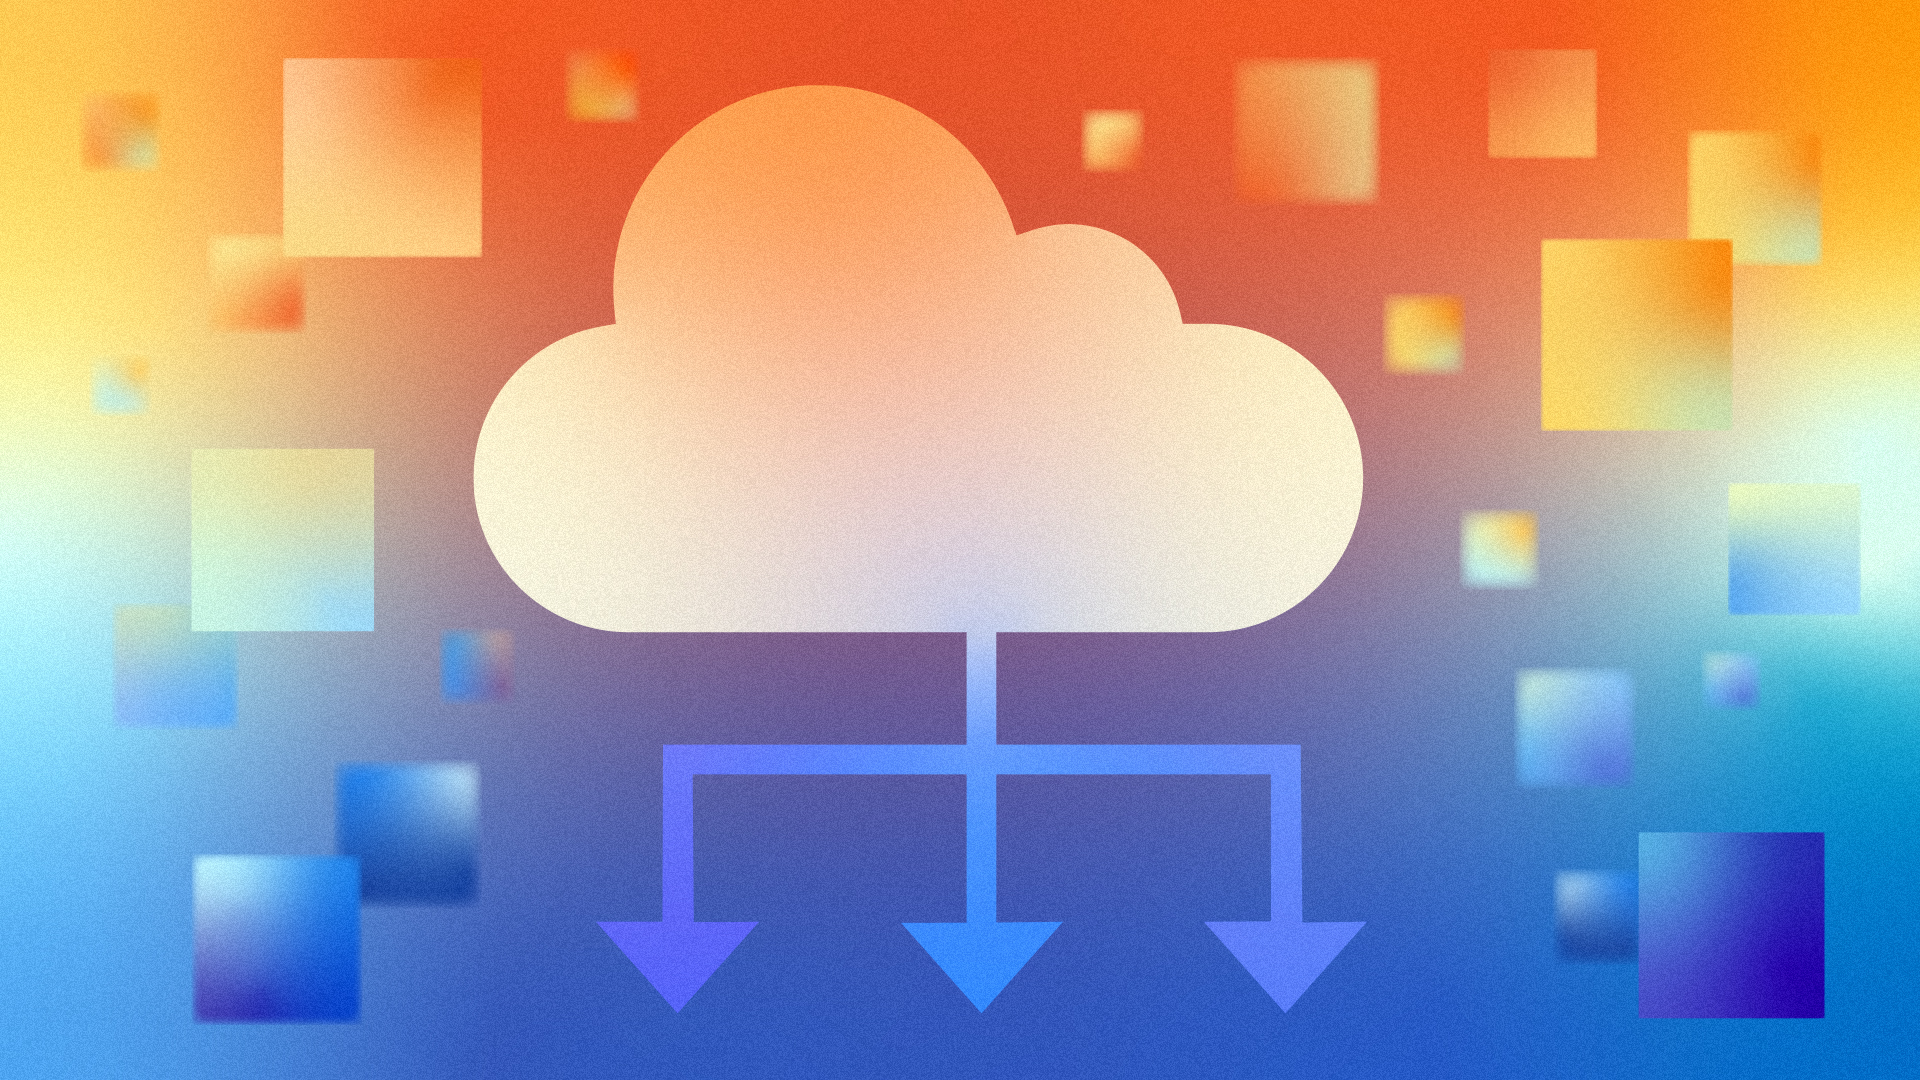 Data cloud and blocks on an orange to blue gradient